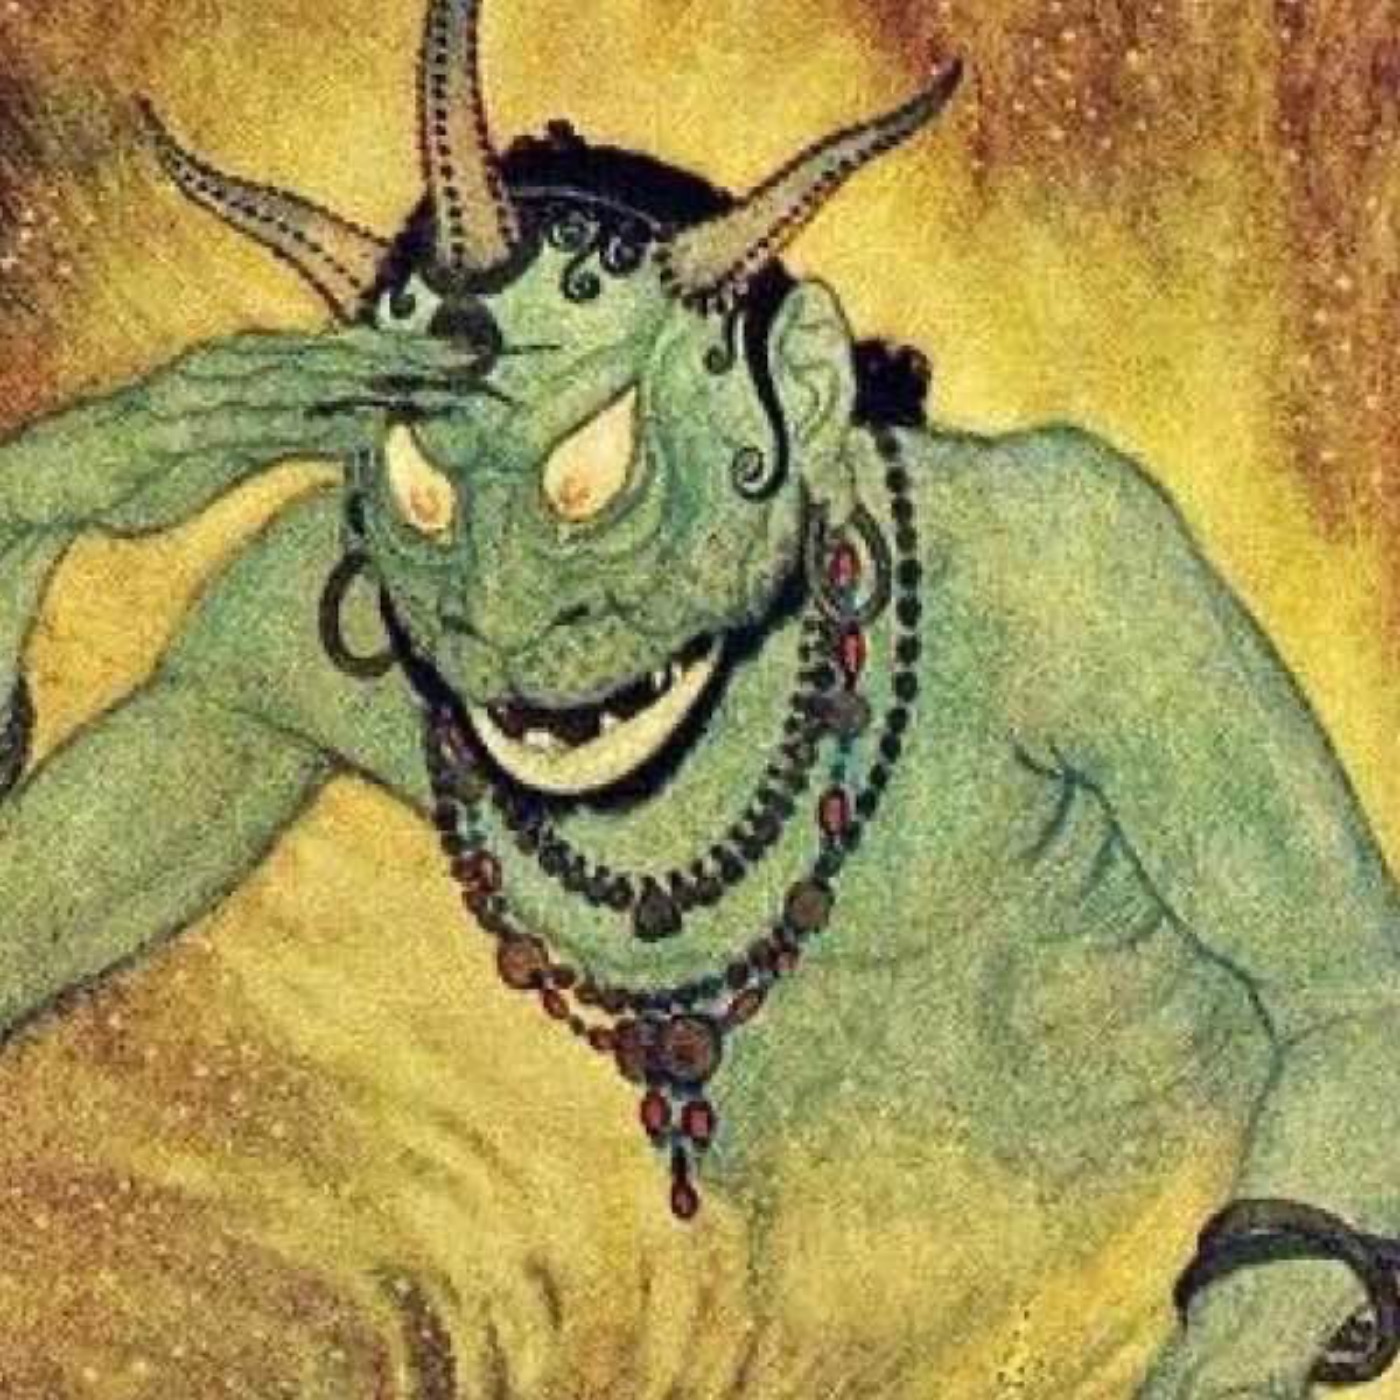 What are the Jinn?